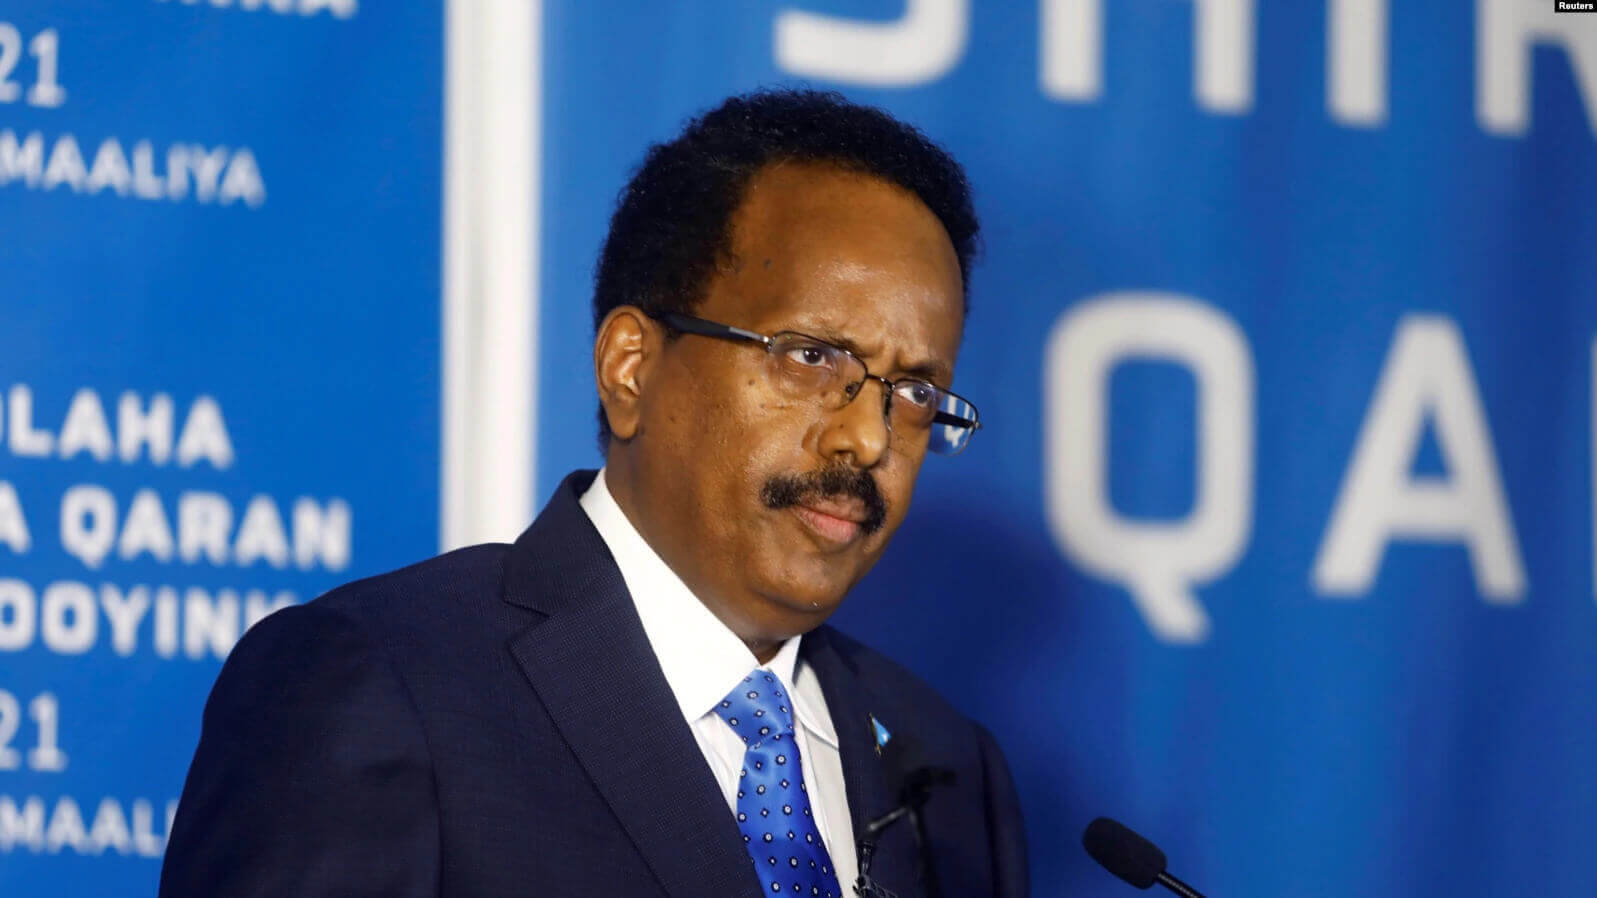 Somali President Farmaajo Suspends PM Roble for Second Time in Four Months